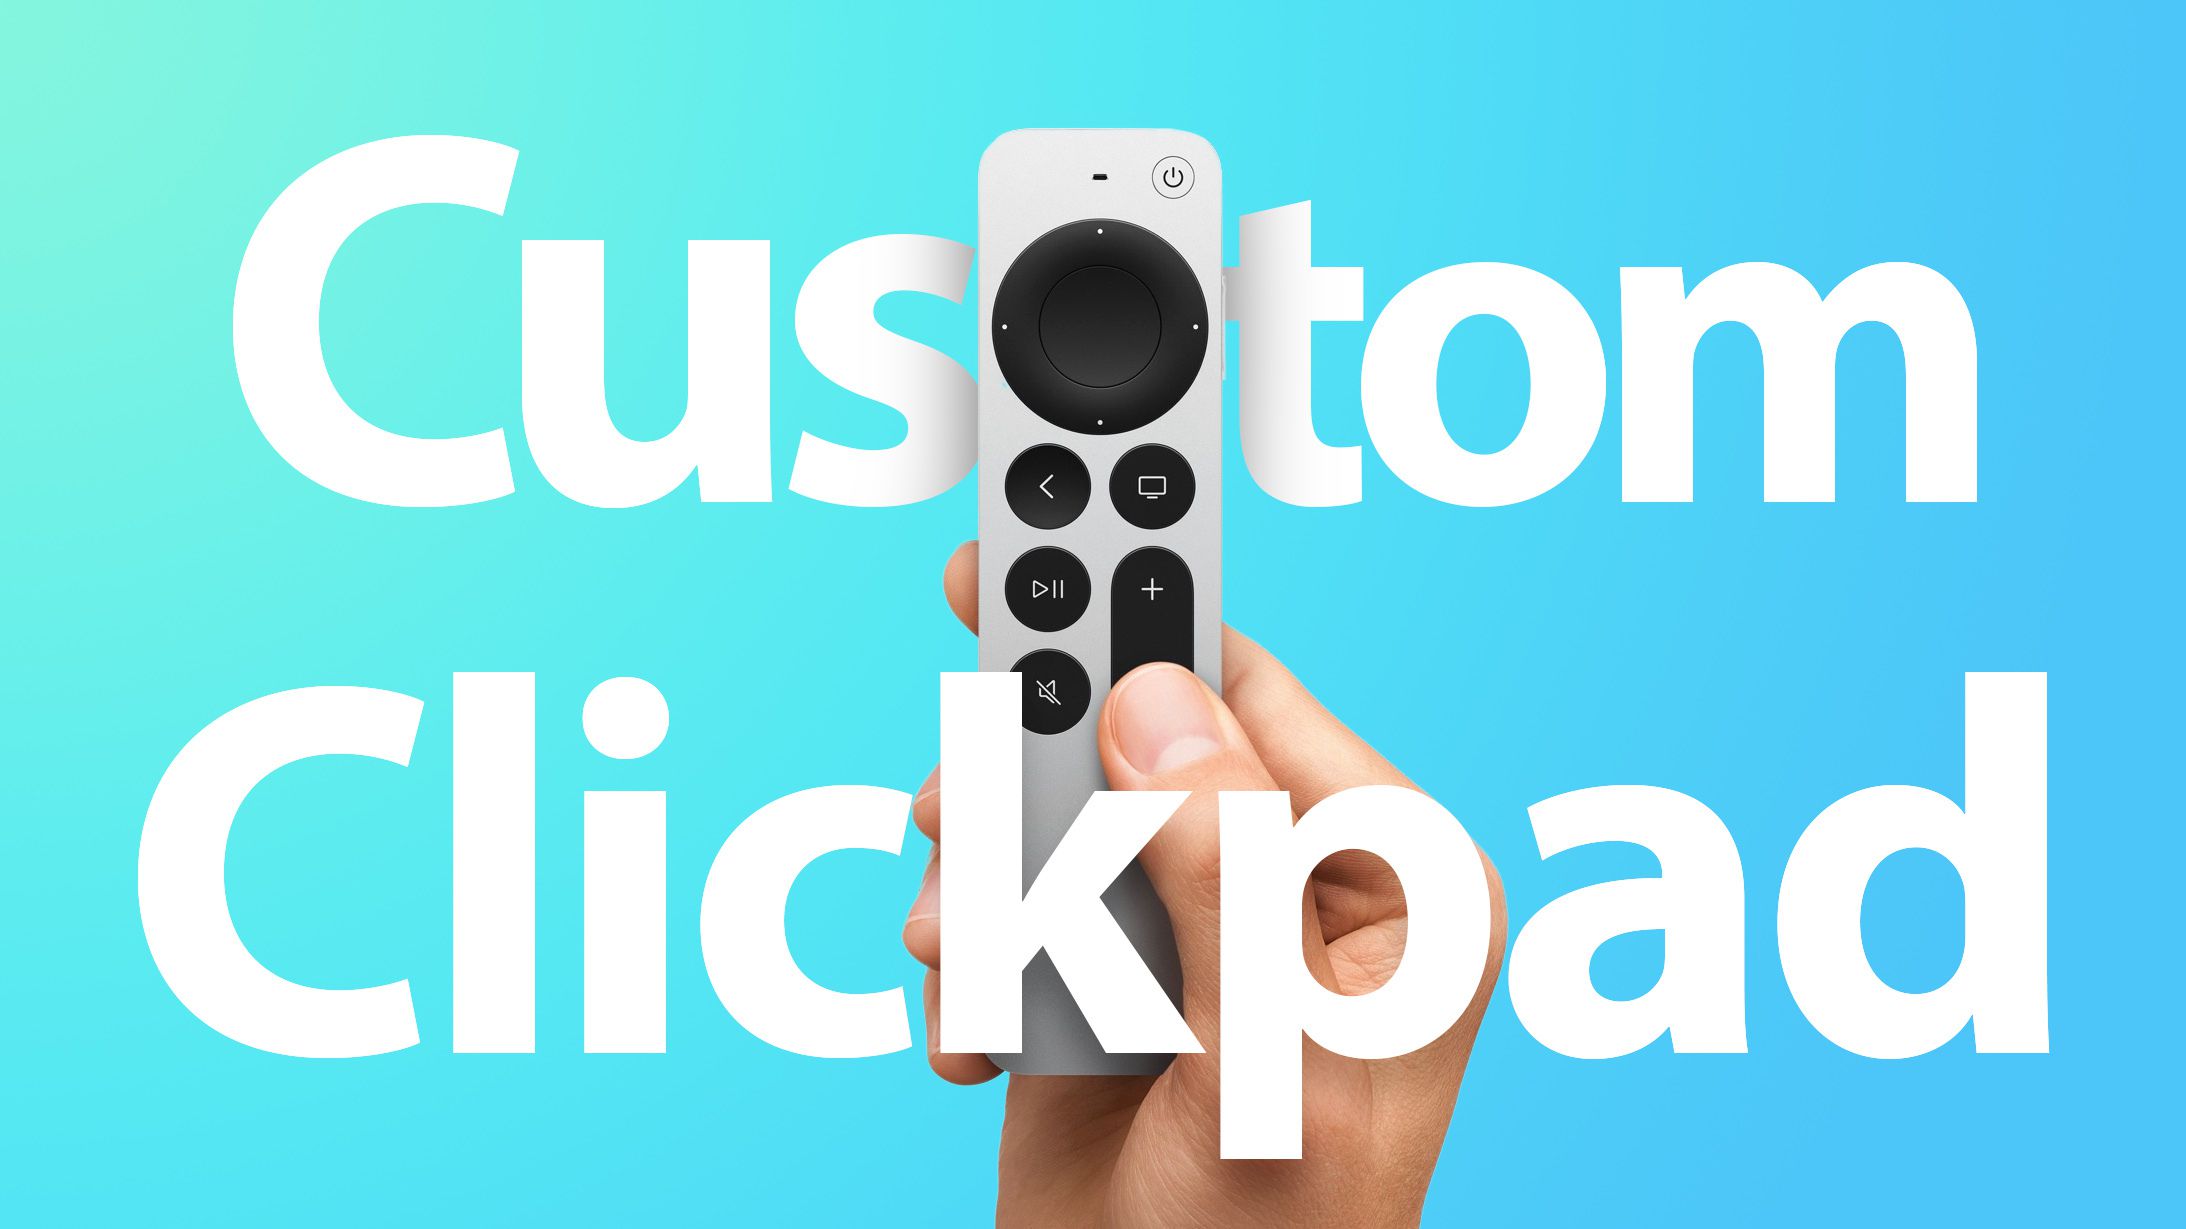 Apple TV: How to Customize the Clickpad on the New Remote (2nd Gen) - MacRumors